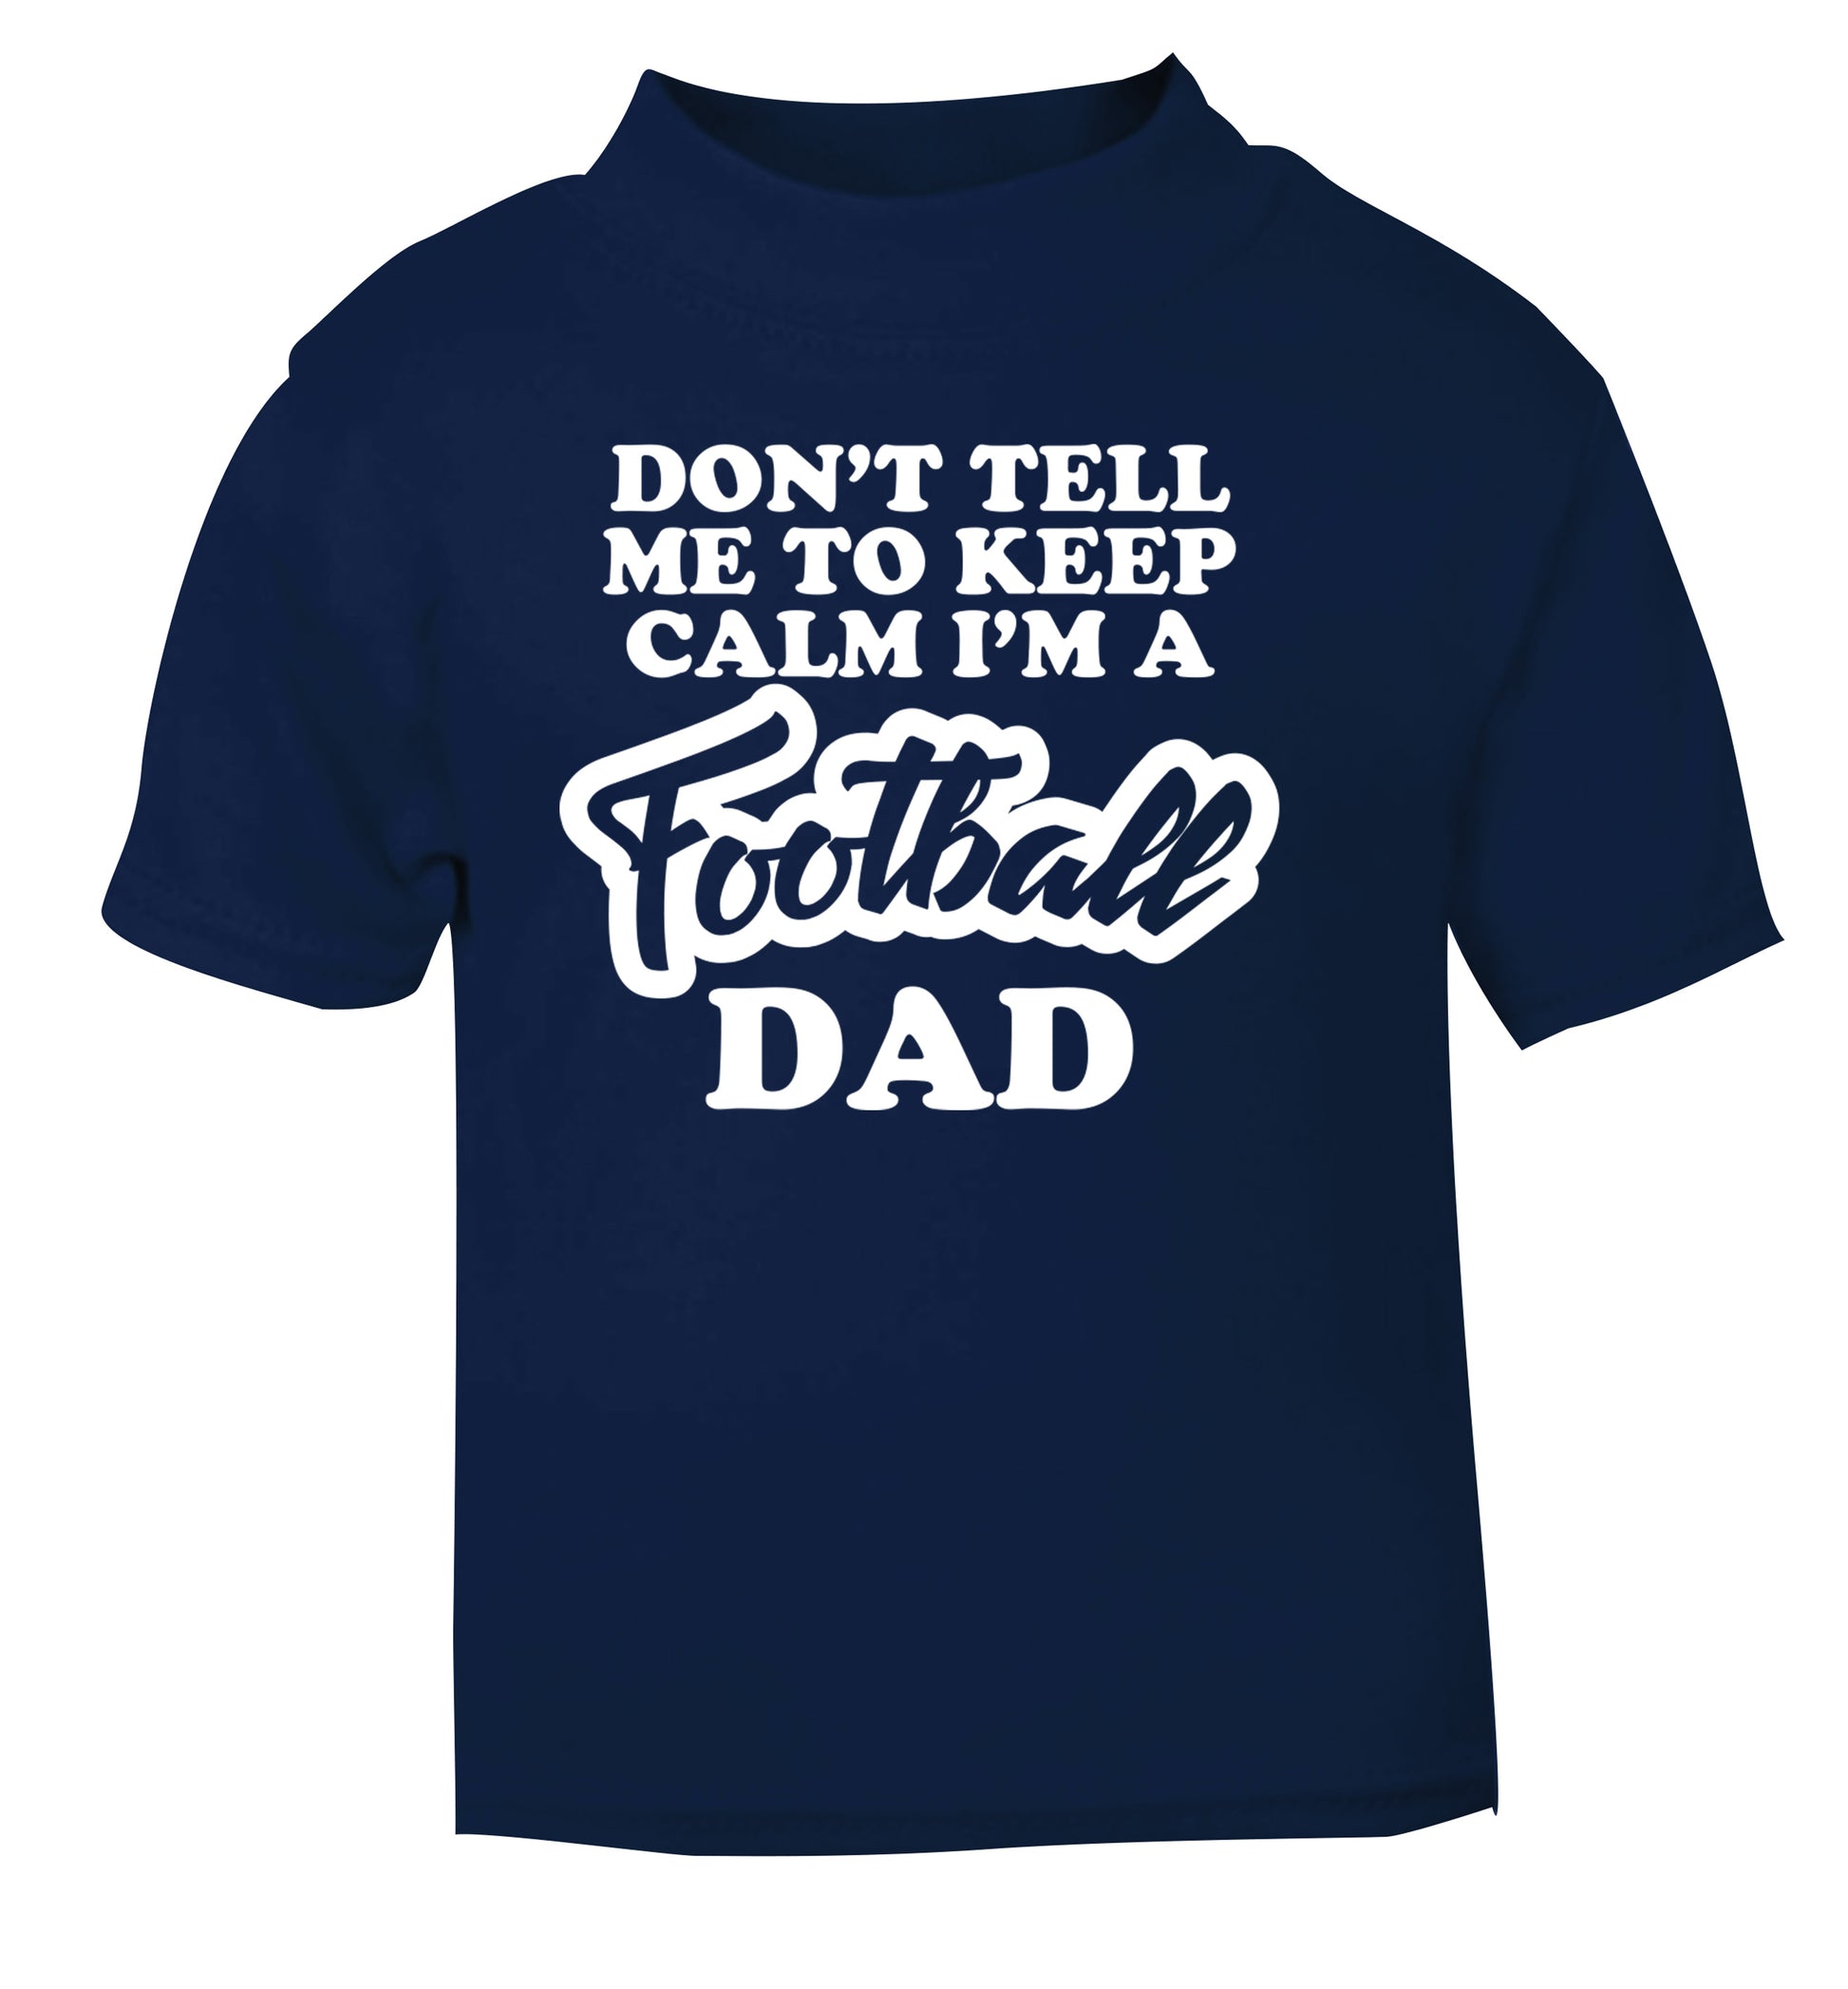 Don't tell me to keep calm I'm a football grandad navy Baby Toddler Tshirt 2 Years